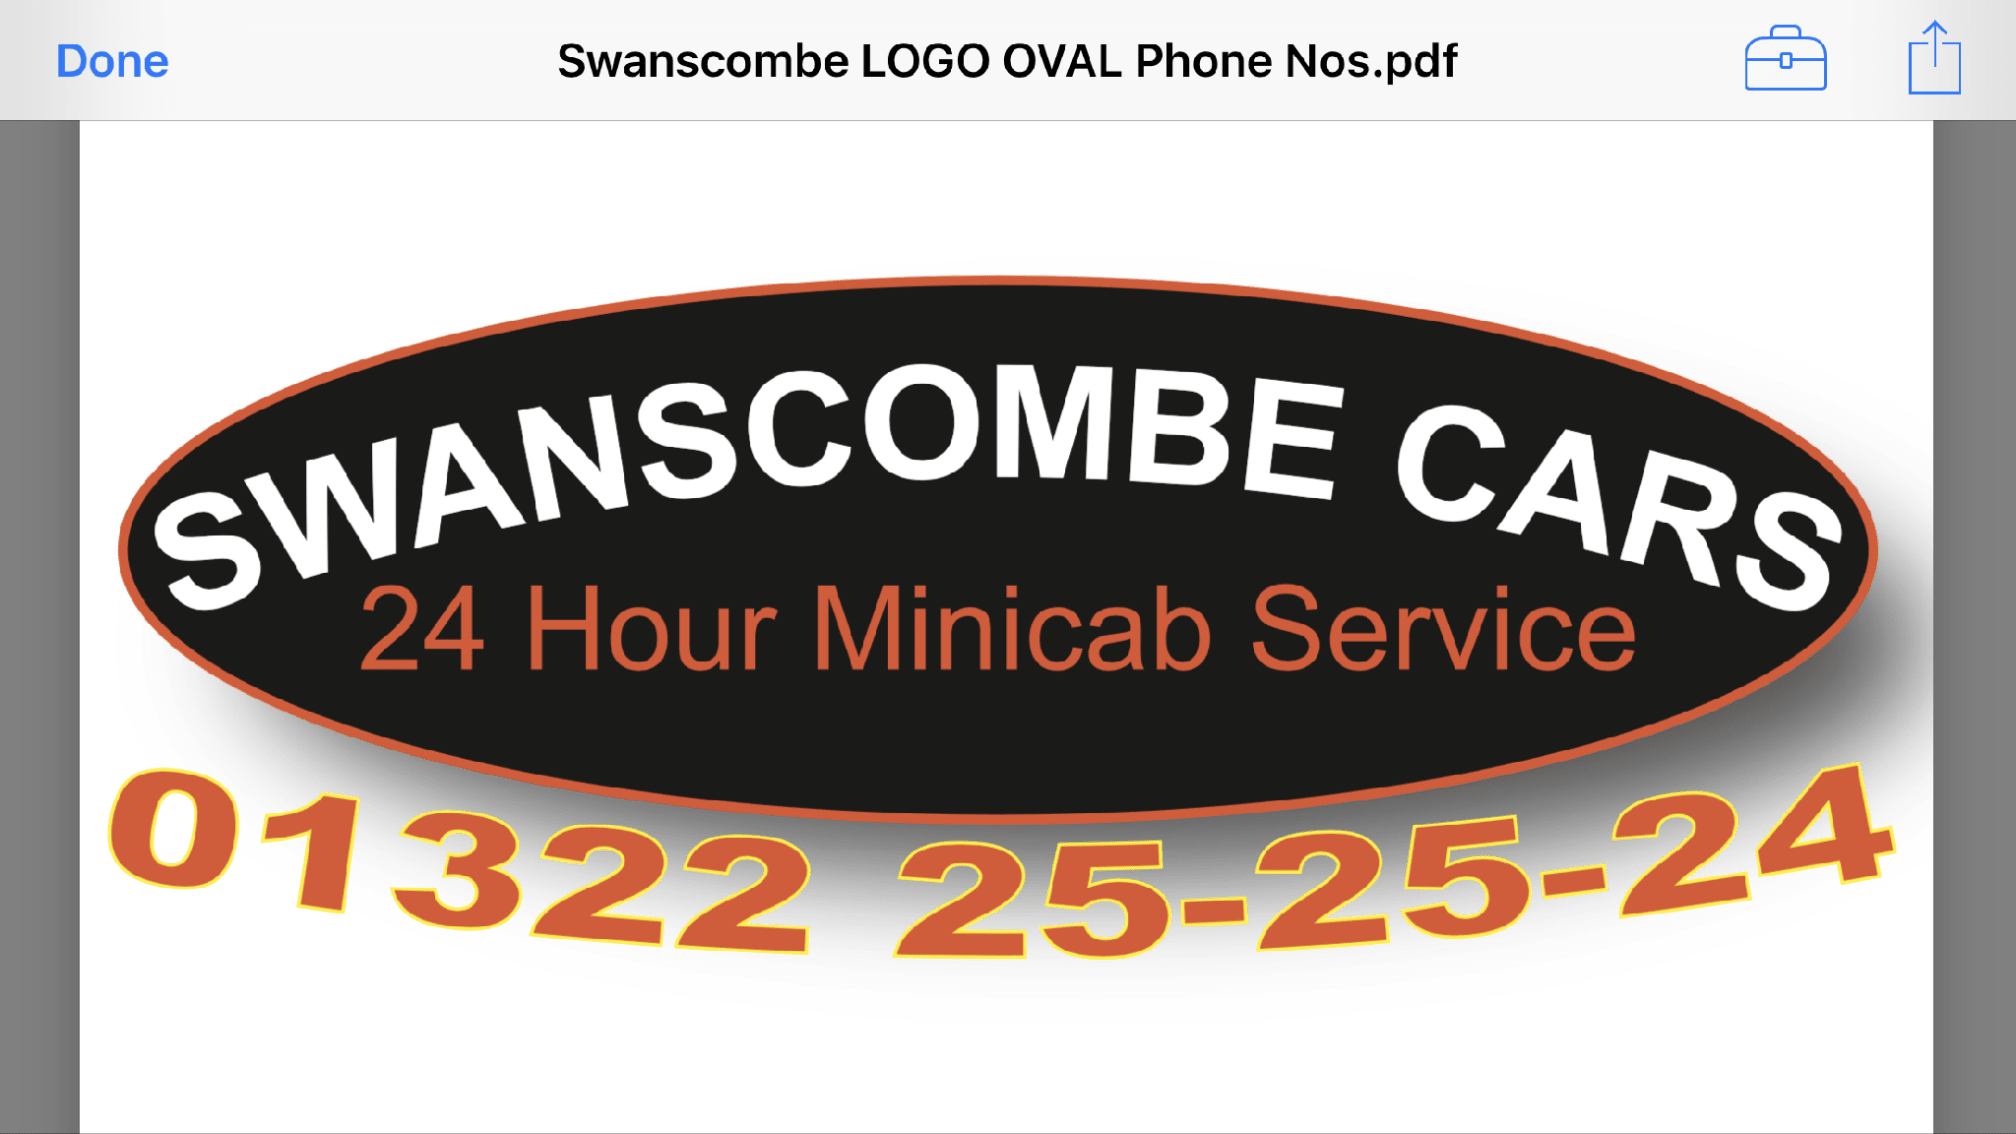 Images Swanscombe Cars